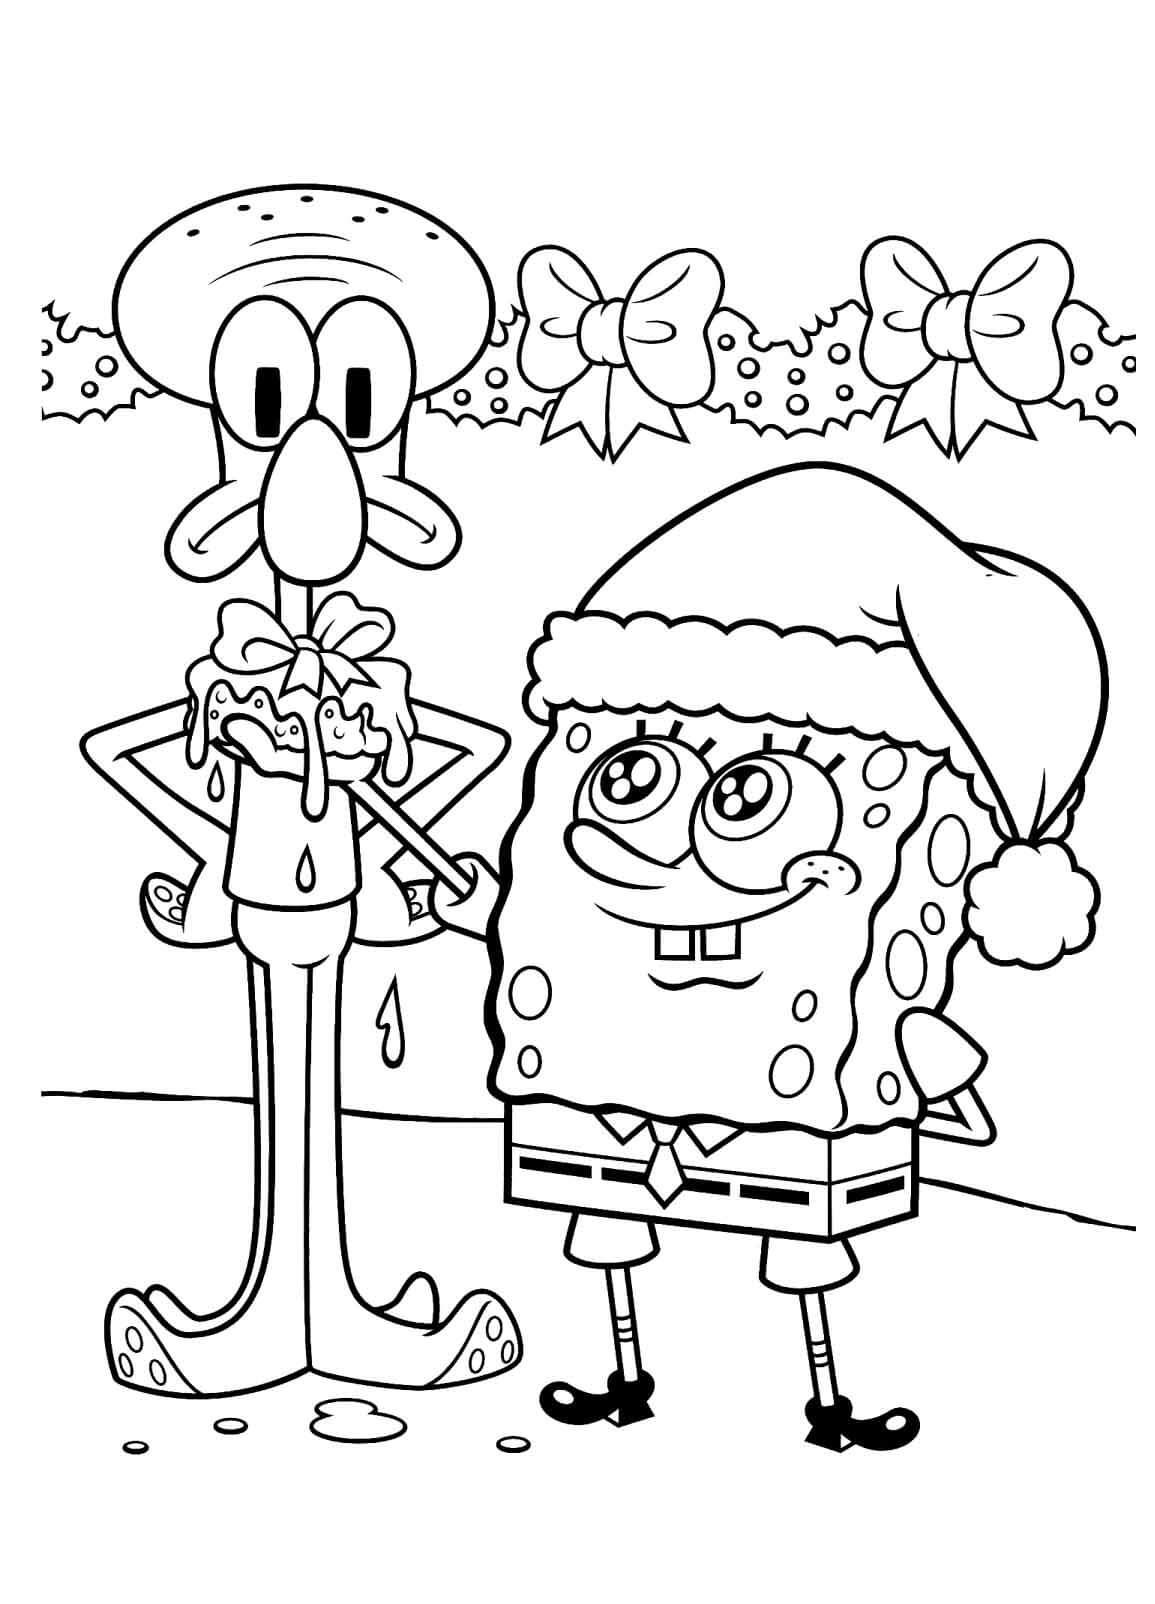 Spongebob and Squidward Christmas Coloring Pages